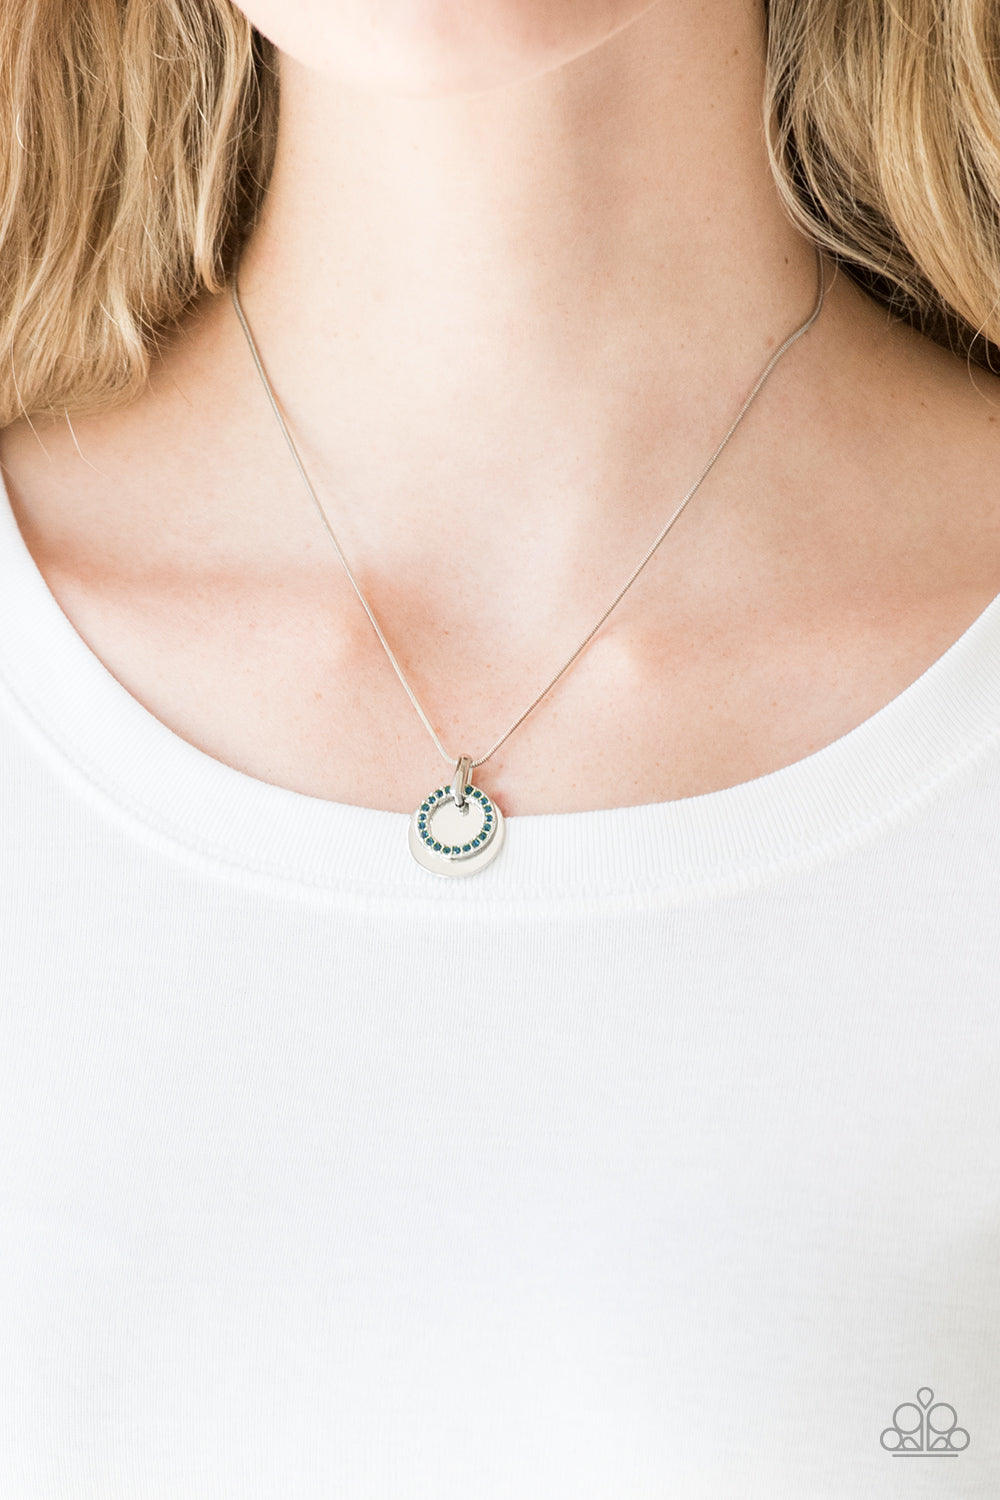 Front and CENTERED - Blue Necklace